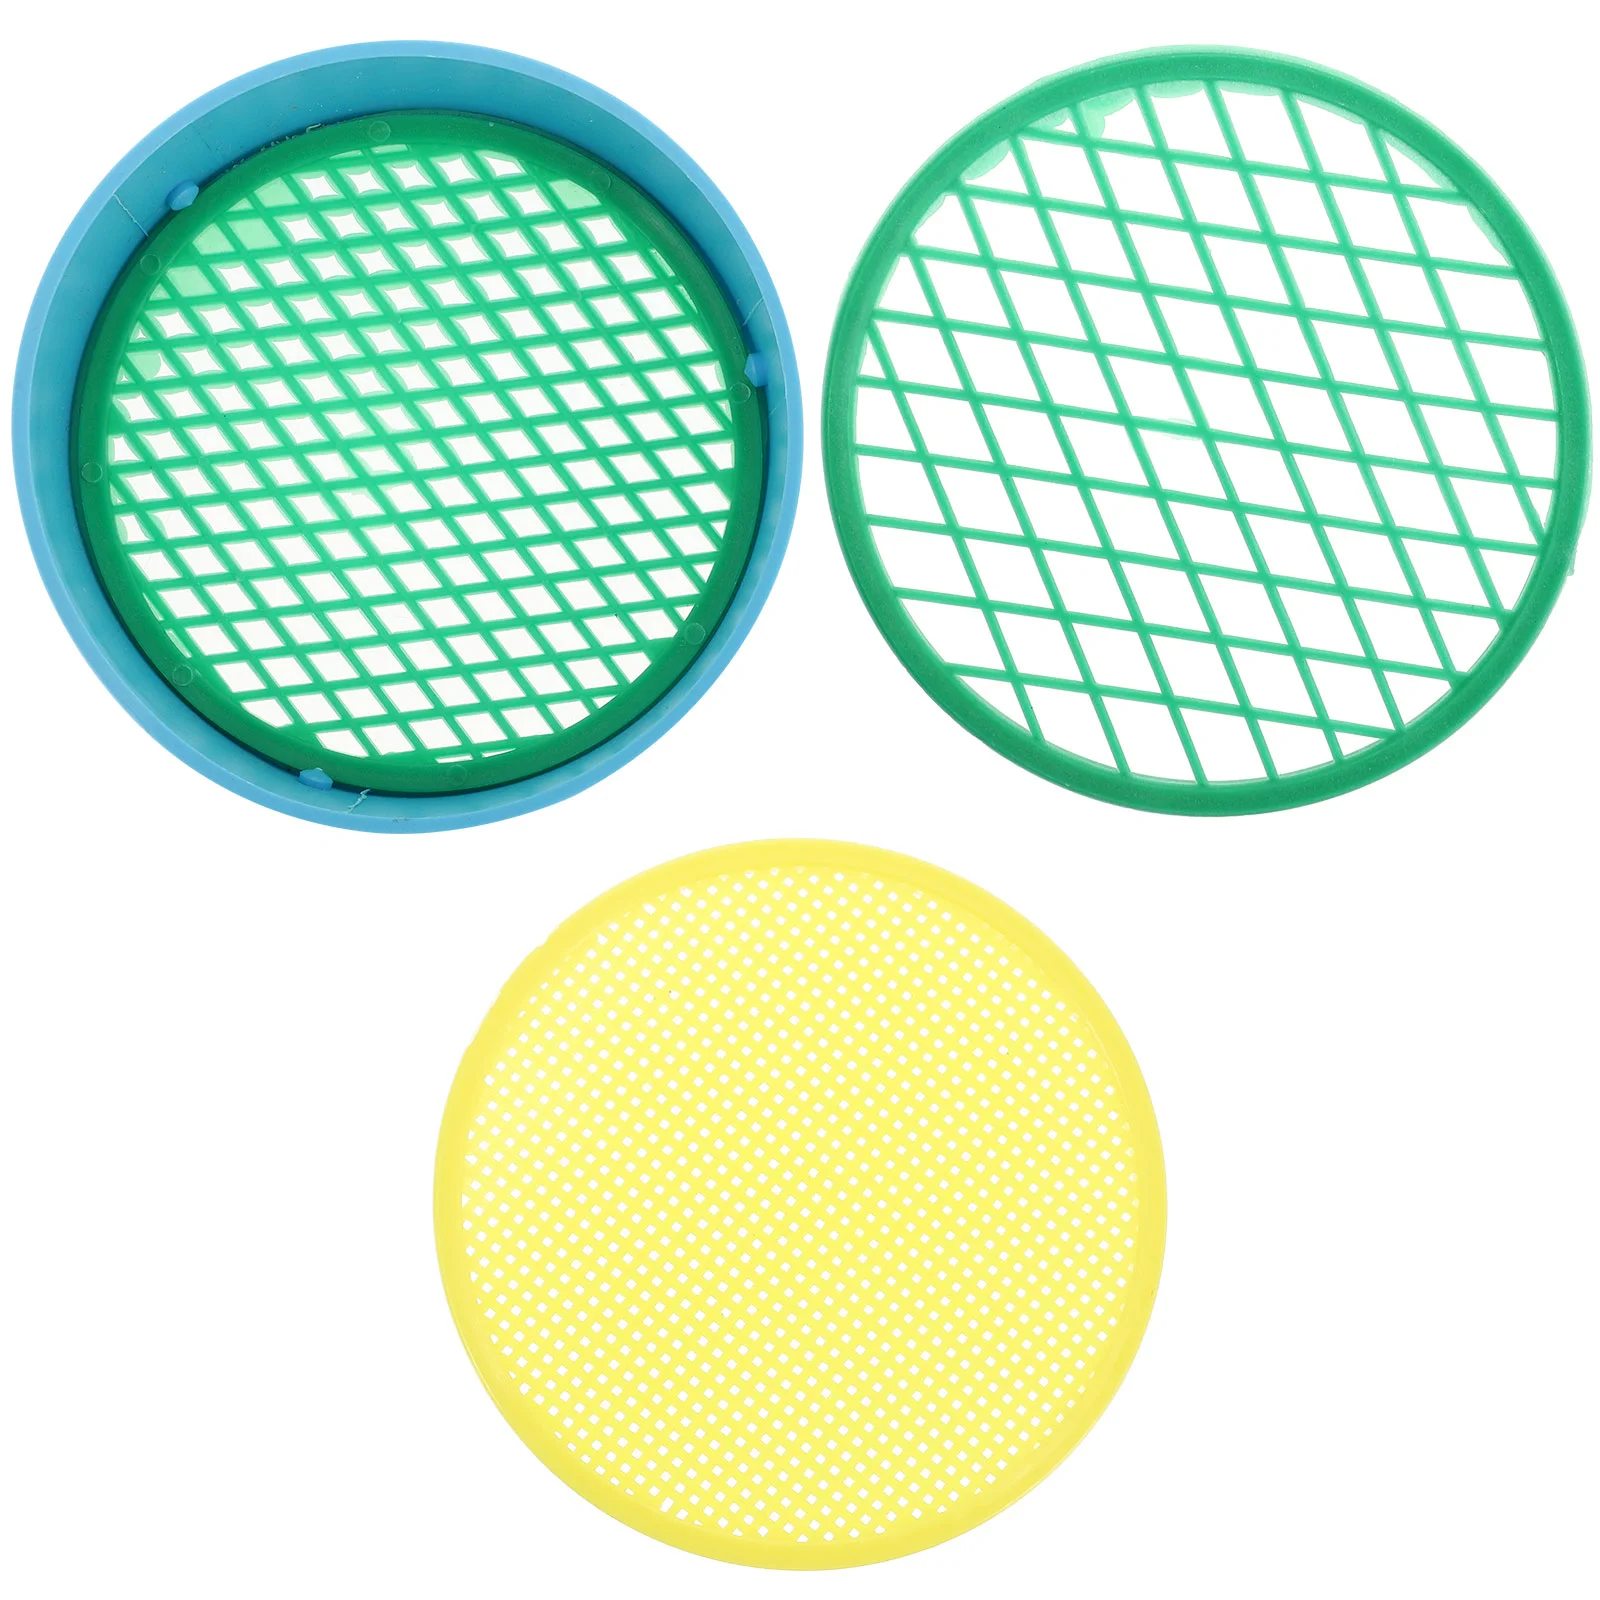  beach toys sieves kids toy strainer sifting sieve pan garden colorful set can watering thumb200